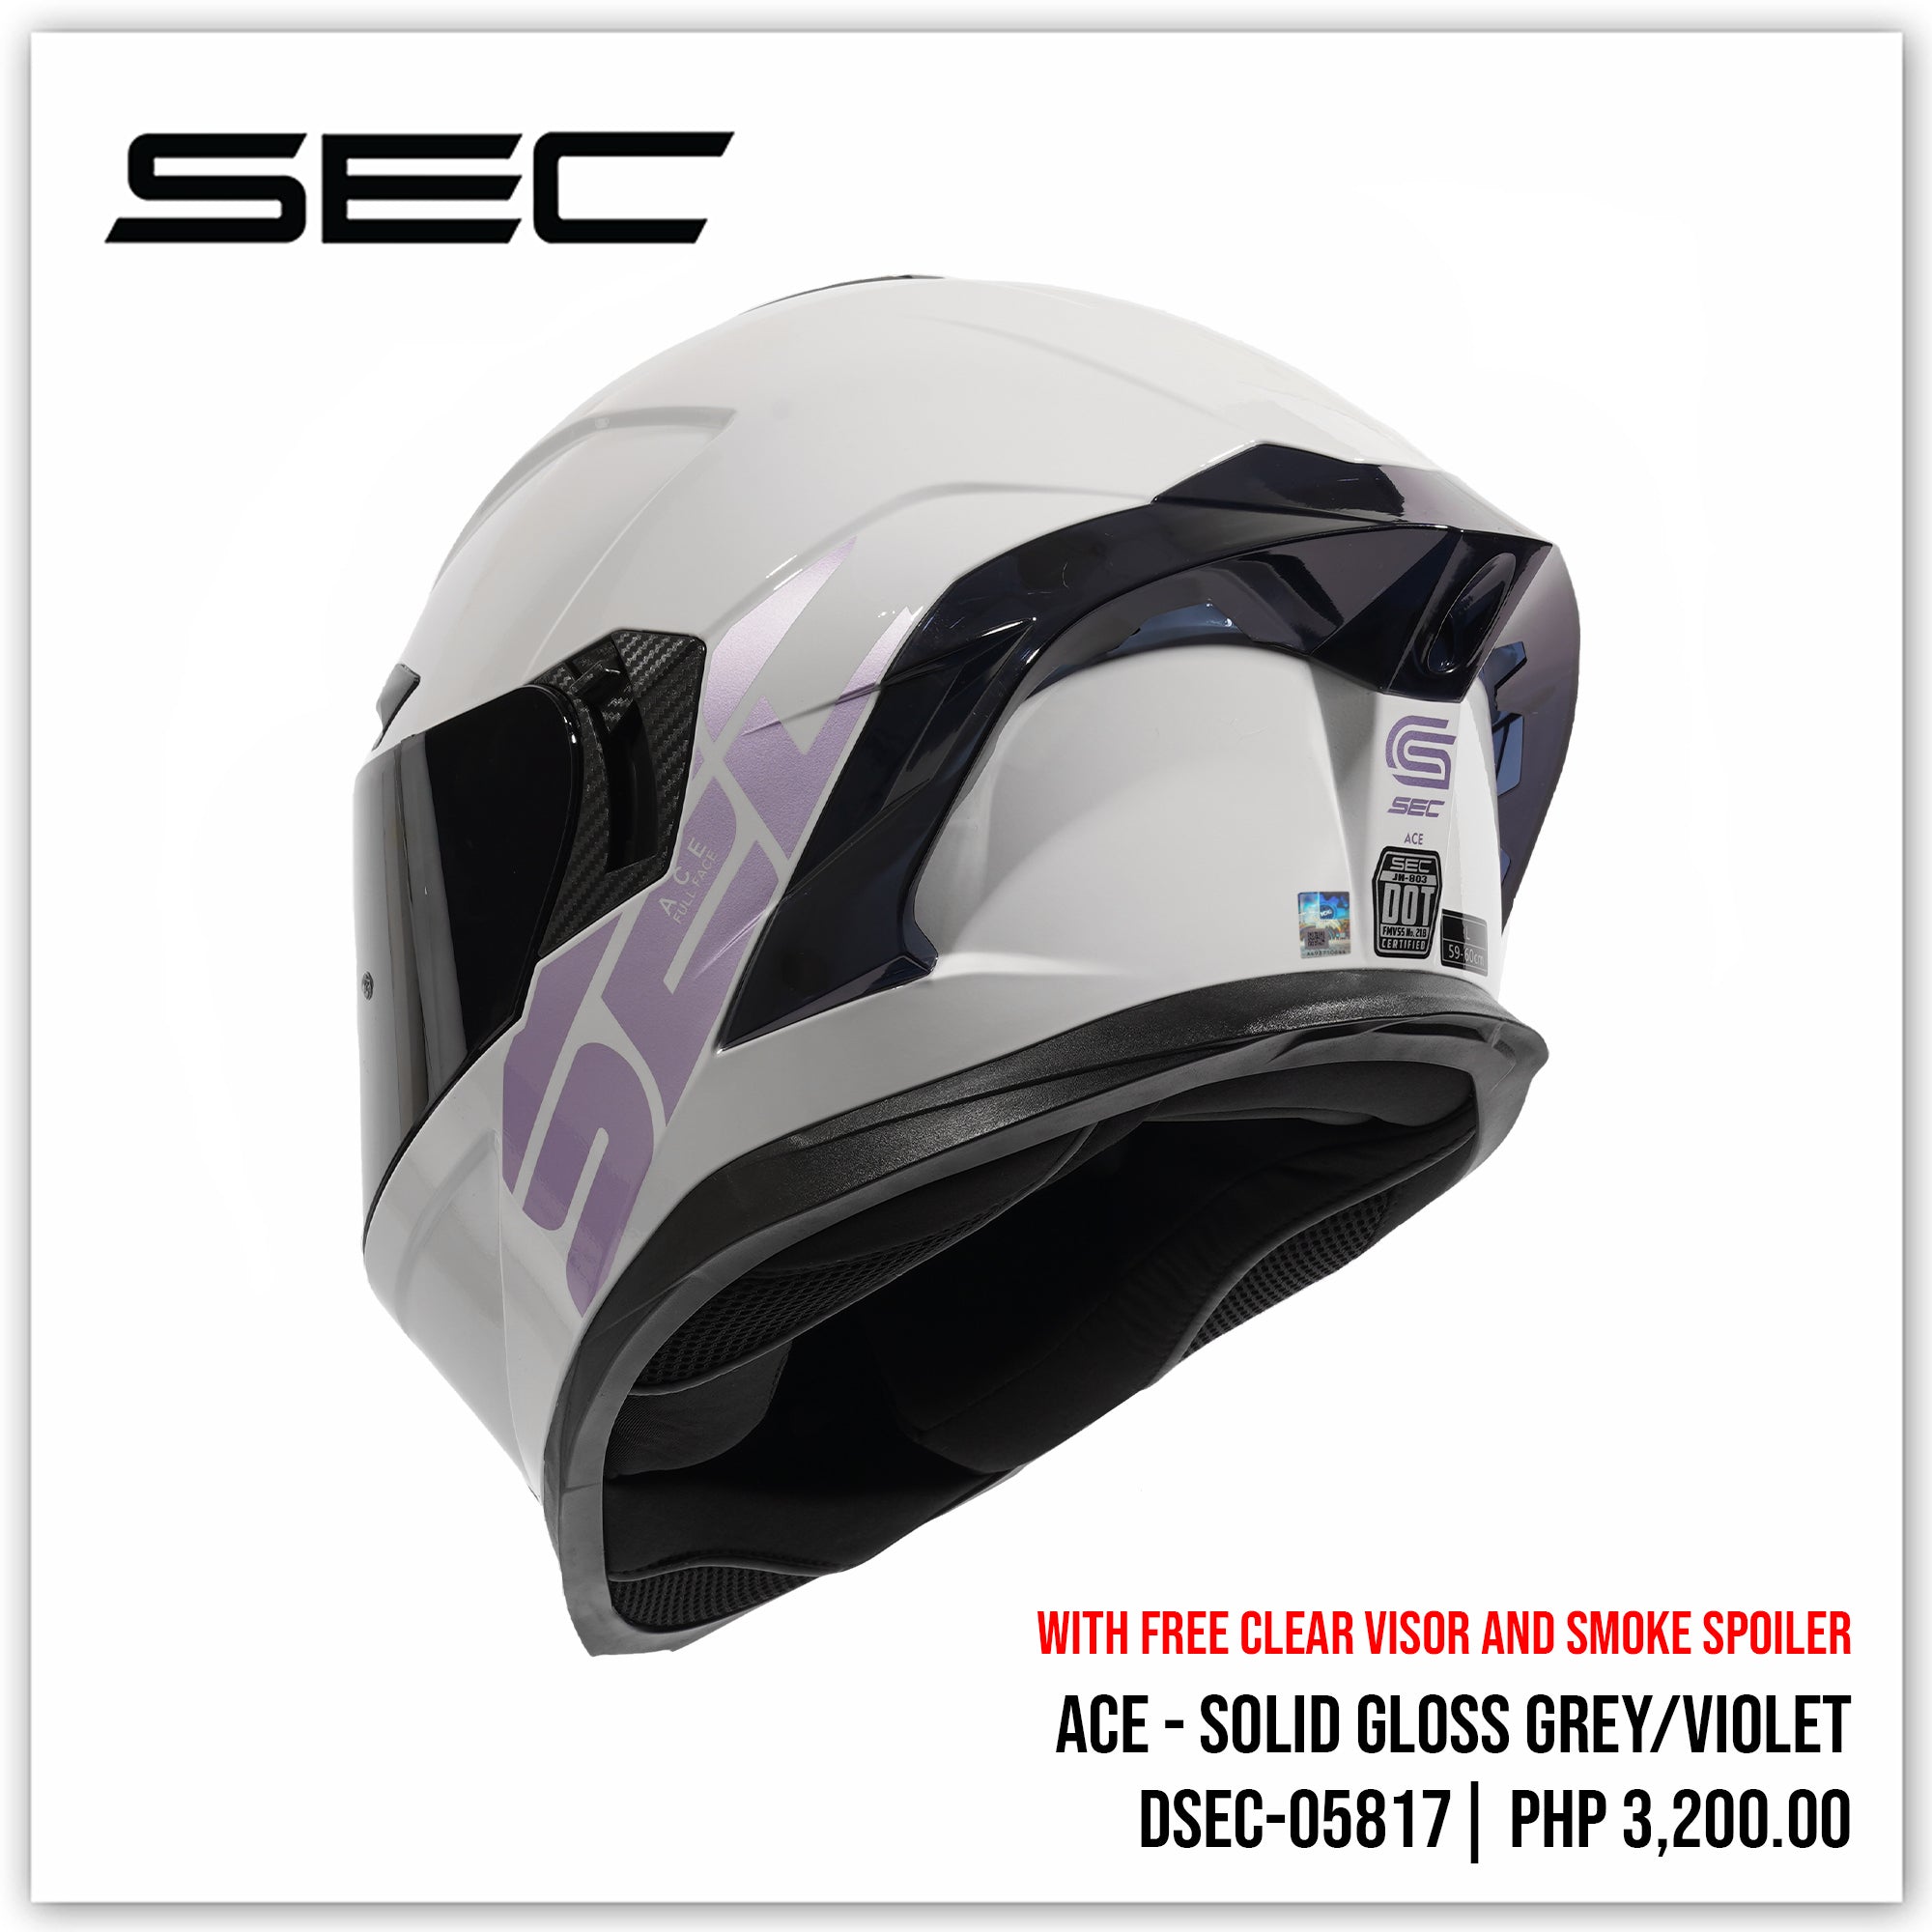 ACE - SOLID GLOSS GREY - VIOLET